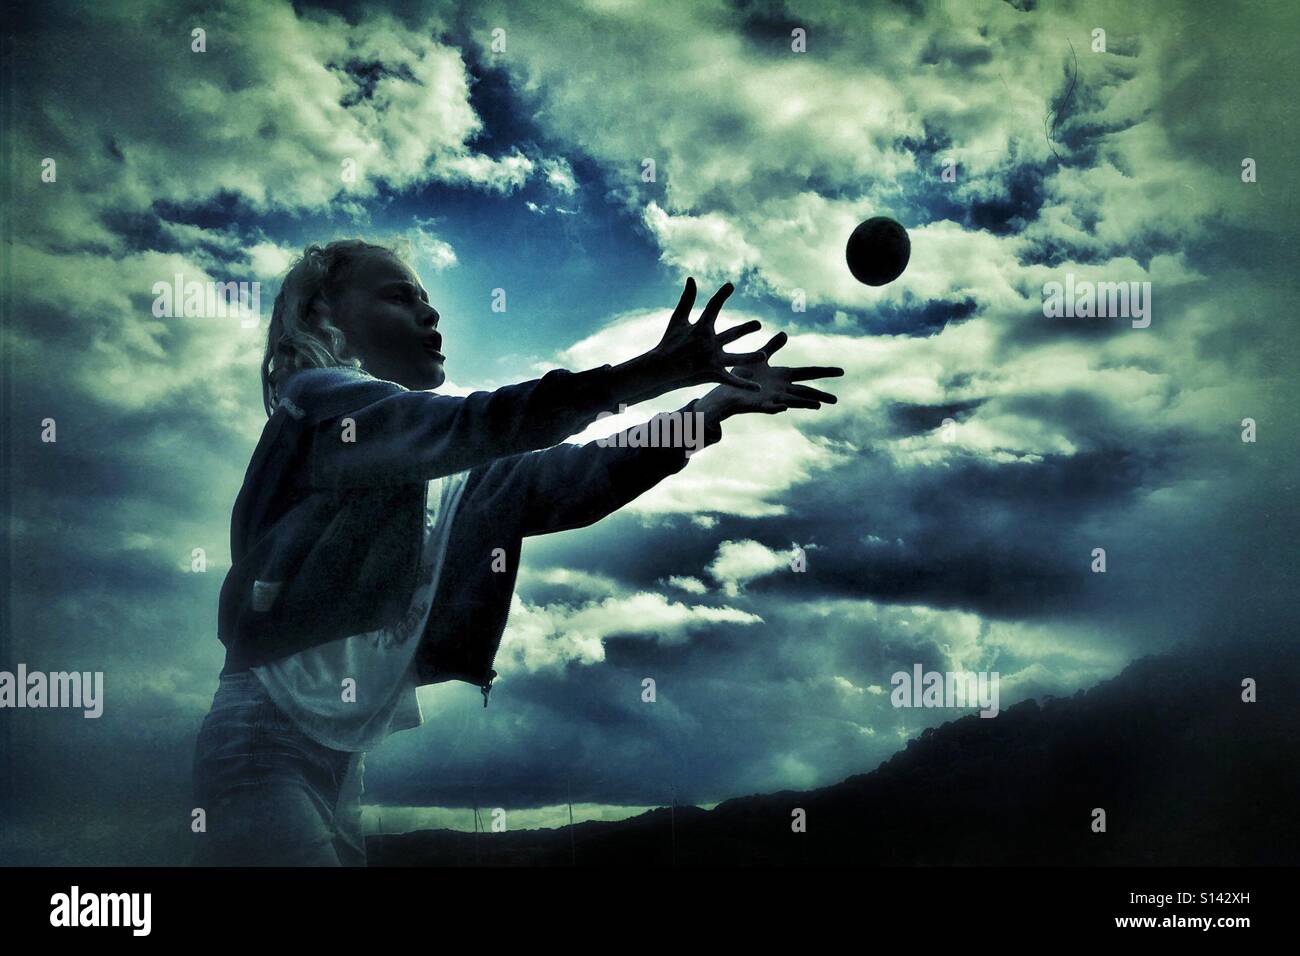 Young girl catching ball against a dramatic cloudy sky Stock Photo